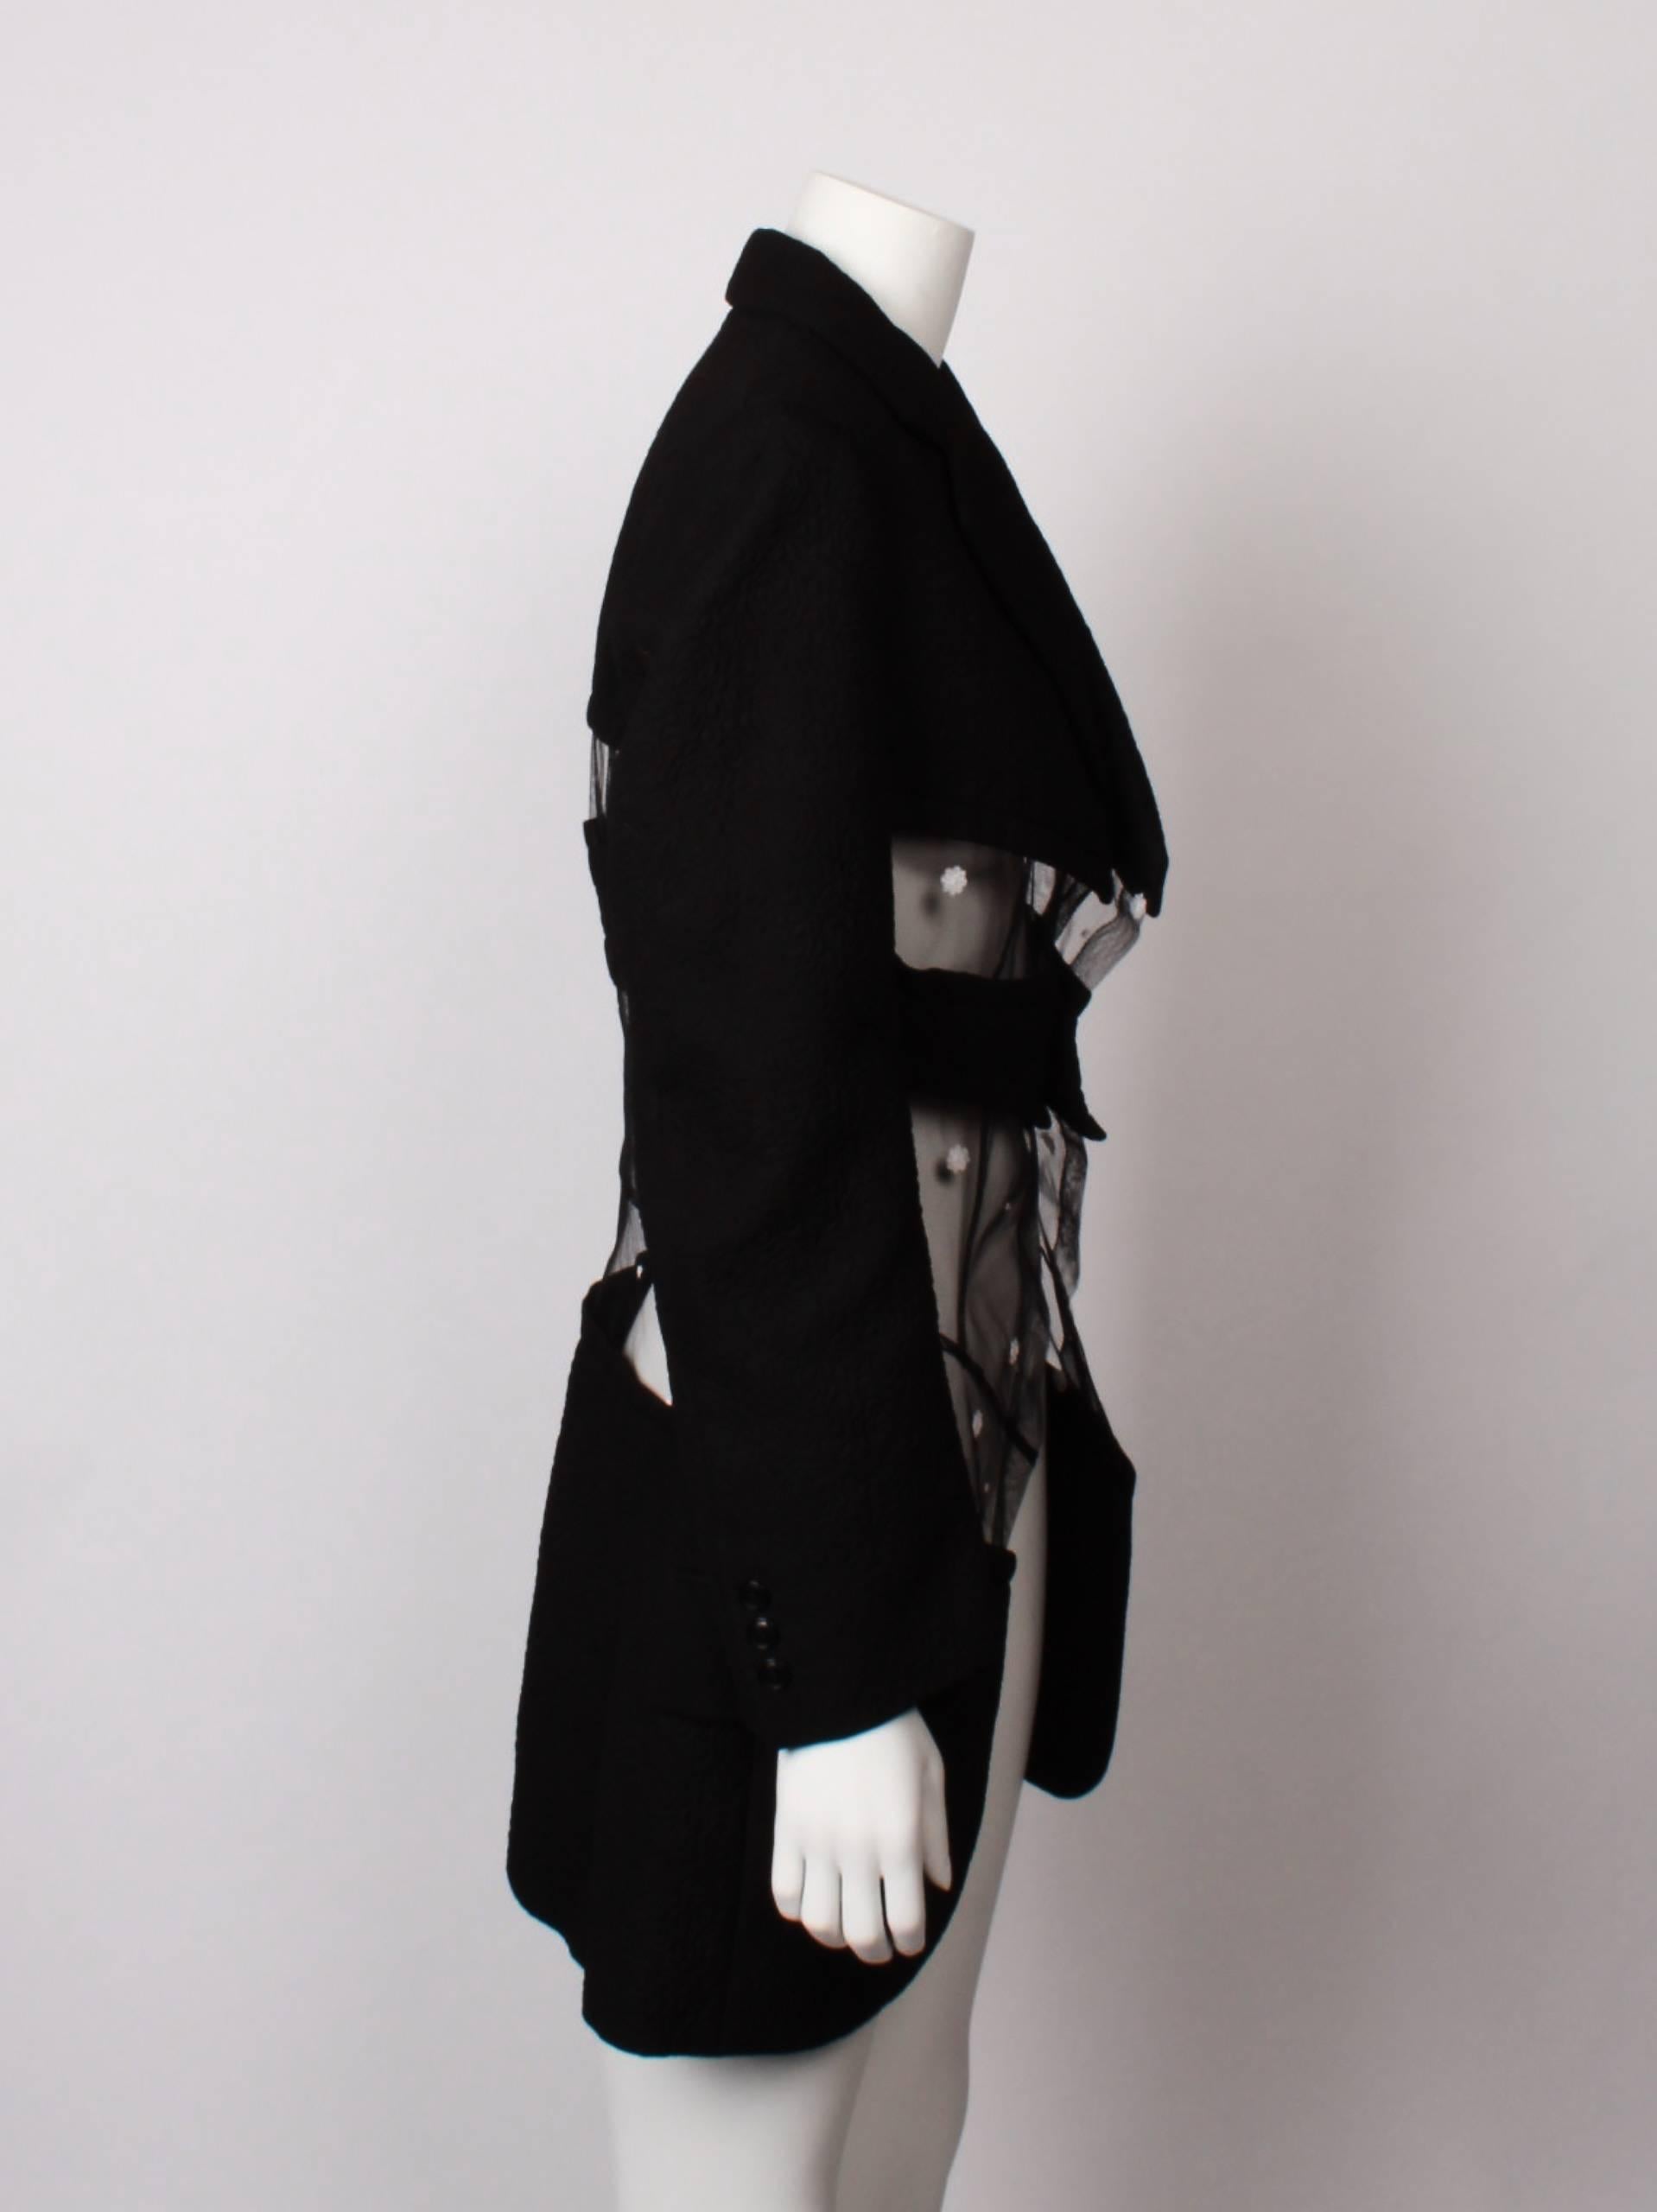 COMME DES GARCONS tailored jacket with sheer veil panels.
Solid black silk textured and fully lined panels meet with floral embroidered sheer tulle inserts. 
Solid panels are slightly padded and embroidered with a floral motif. 
Single breasted with